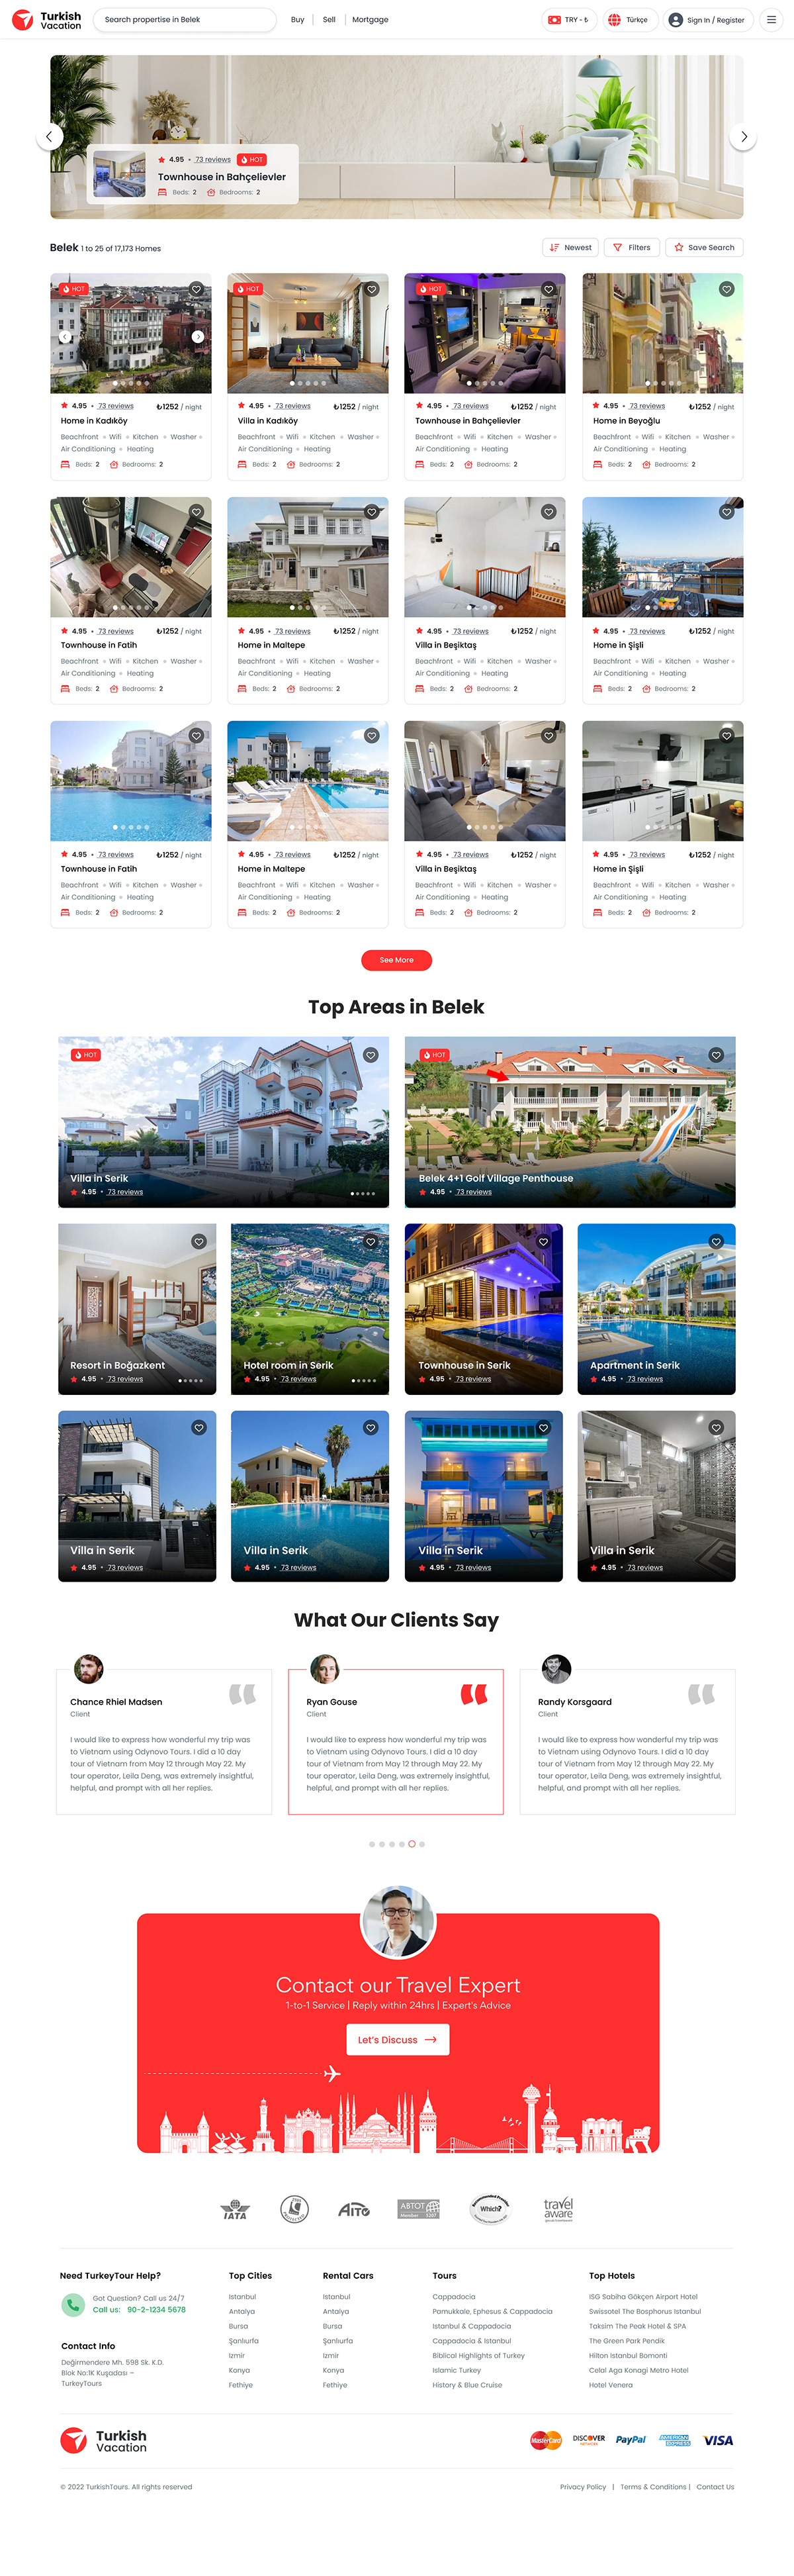 adventure airbnb buy mortage real estate sell Travel Turkey